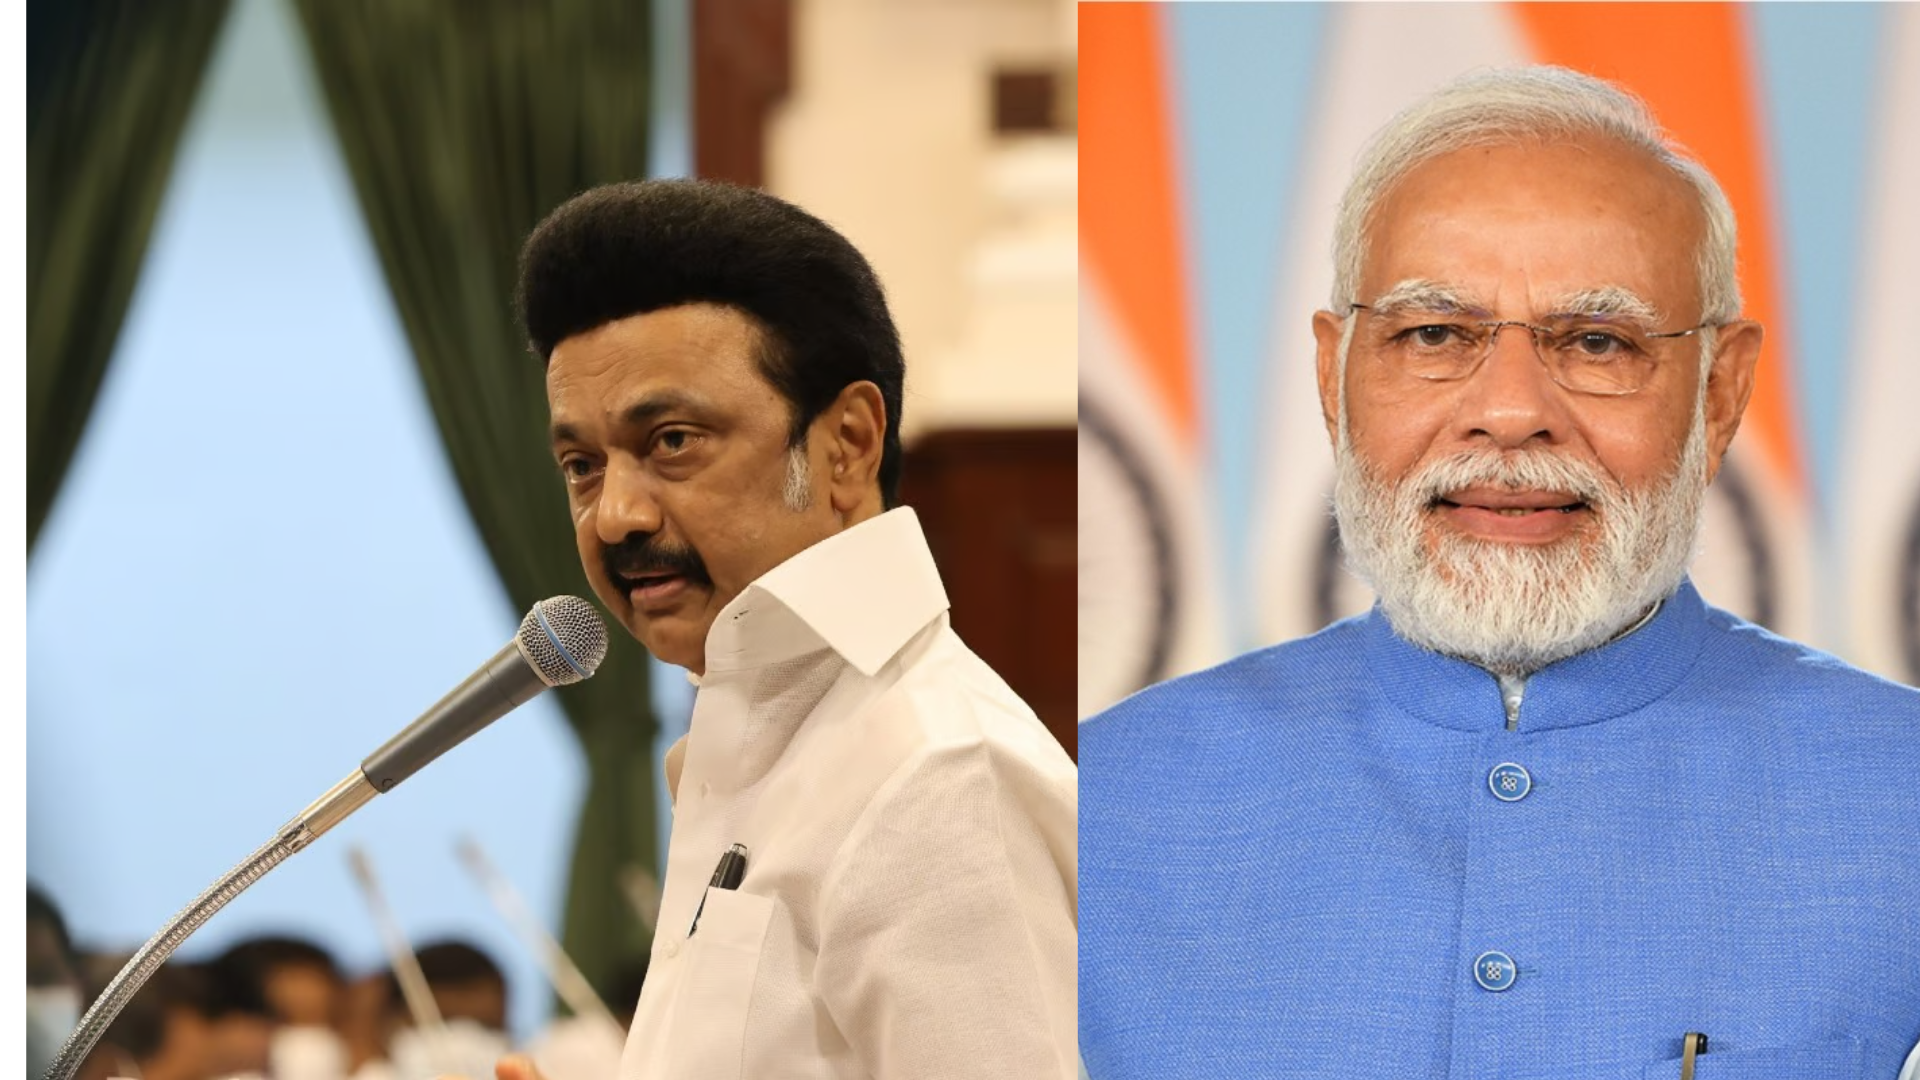 Tamil Nadu Chief Minister MK Stalin Accuses PM Modi Of Misinformation On Fund Allocation